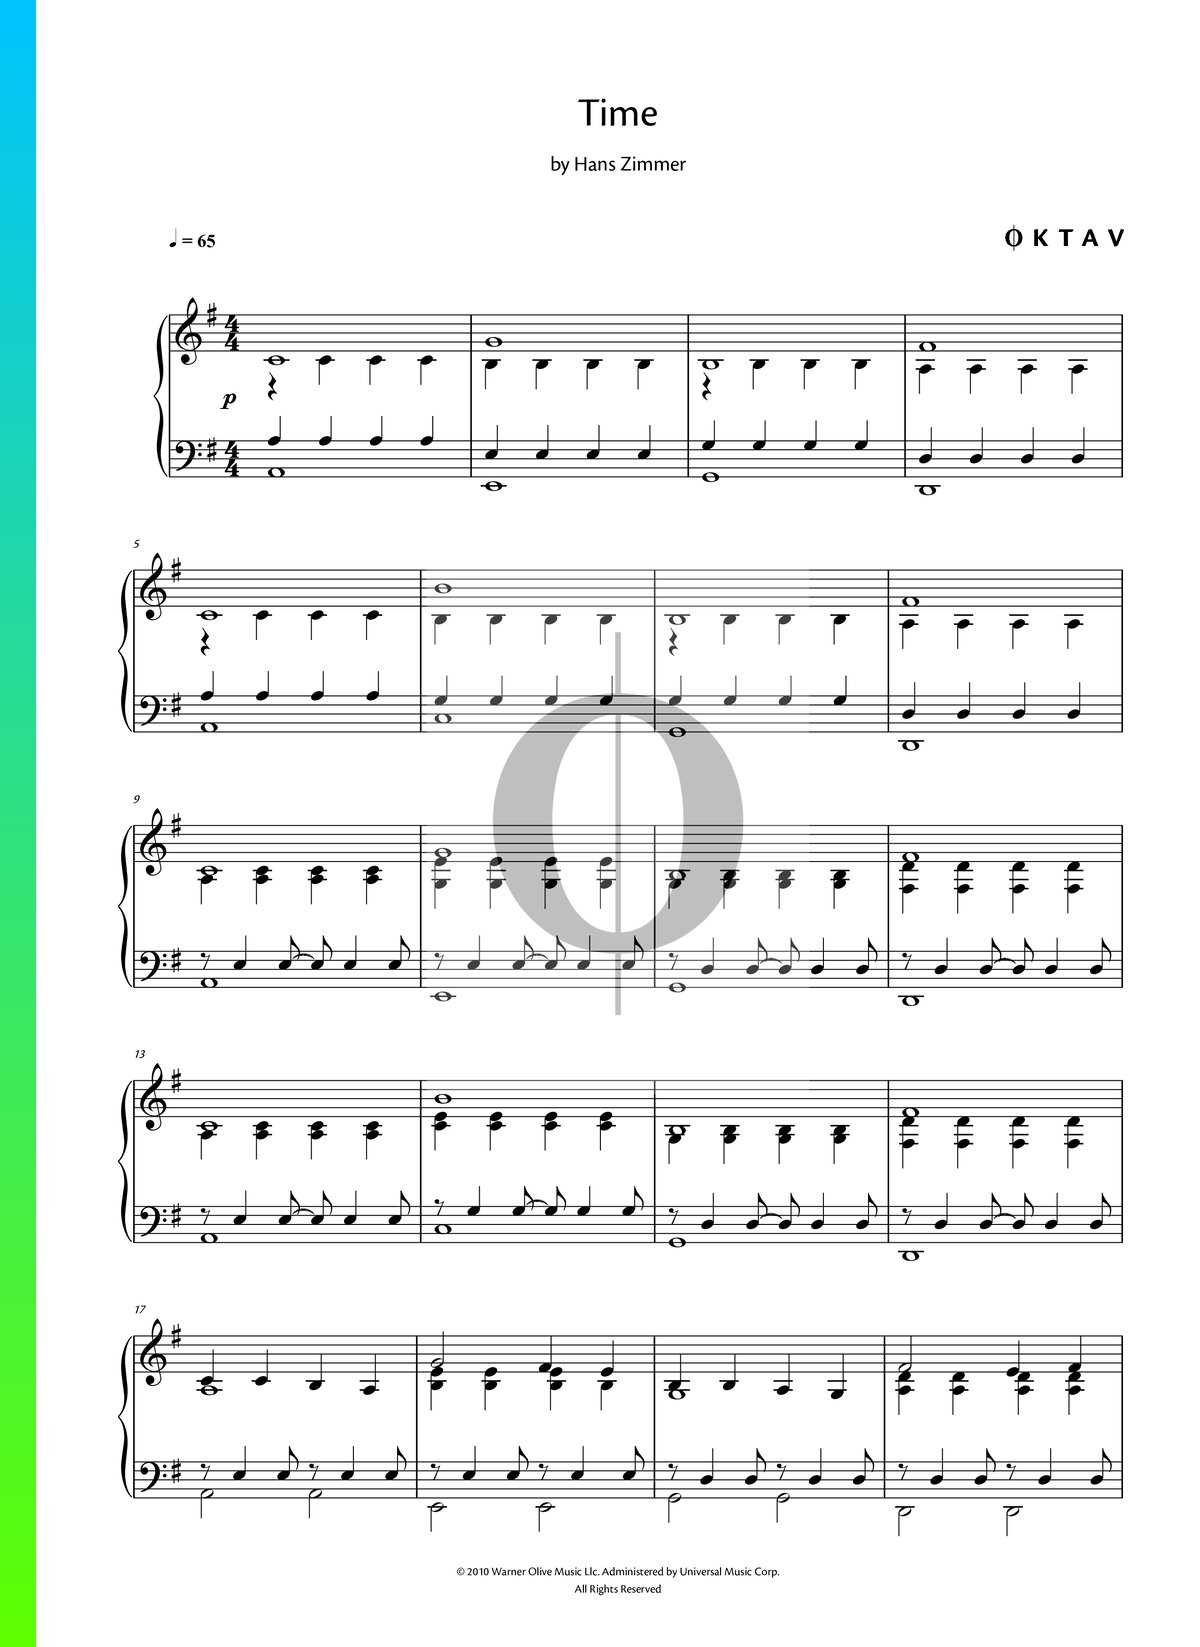 [REPACK] Time Hans Zimmer Piano Sheet Music Pdf - Coub